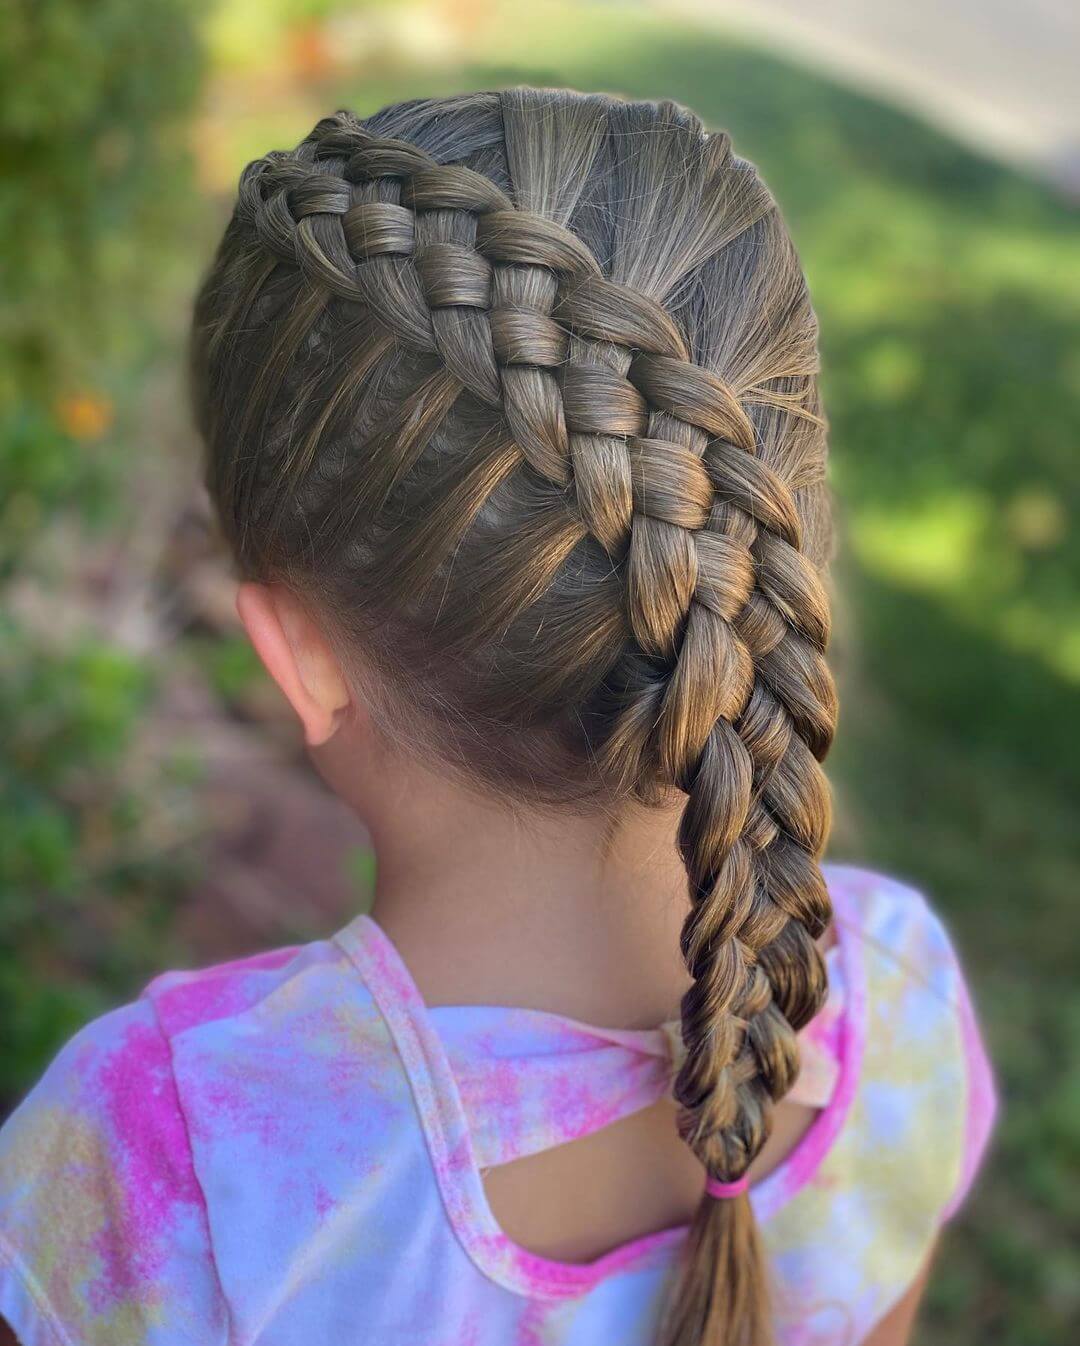 Braids for kids with long hair Thick knotted braid hairstyle for kids